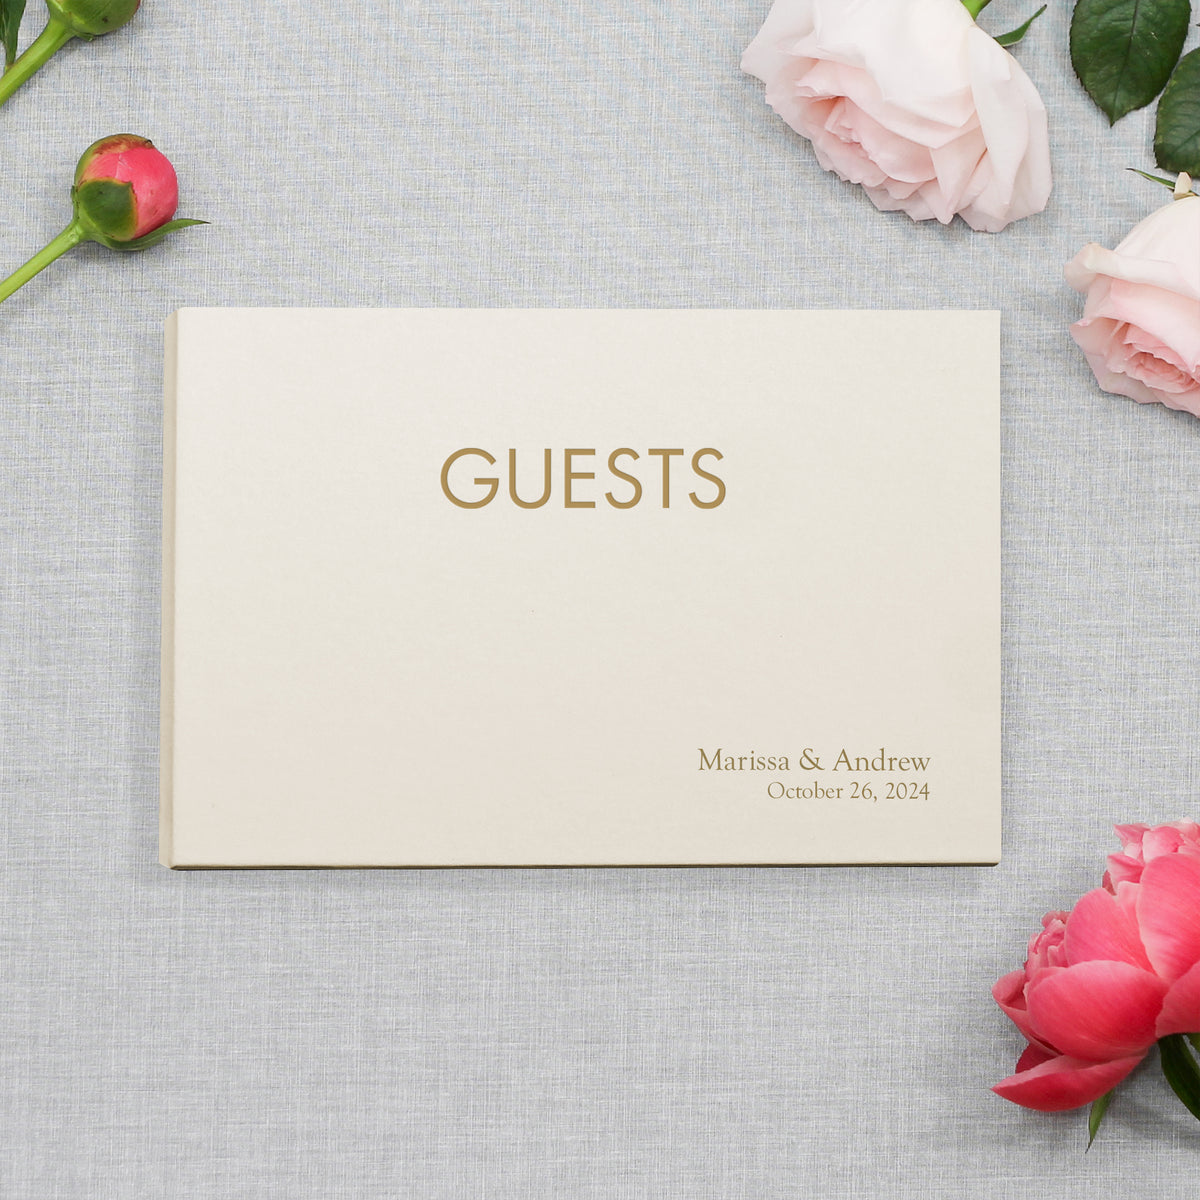 Classic Guestbook | Cover: Pearl Vegan Leather | Available Personalized